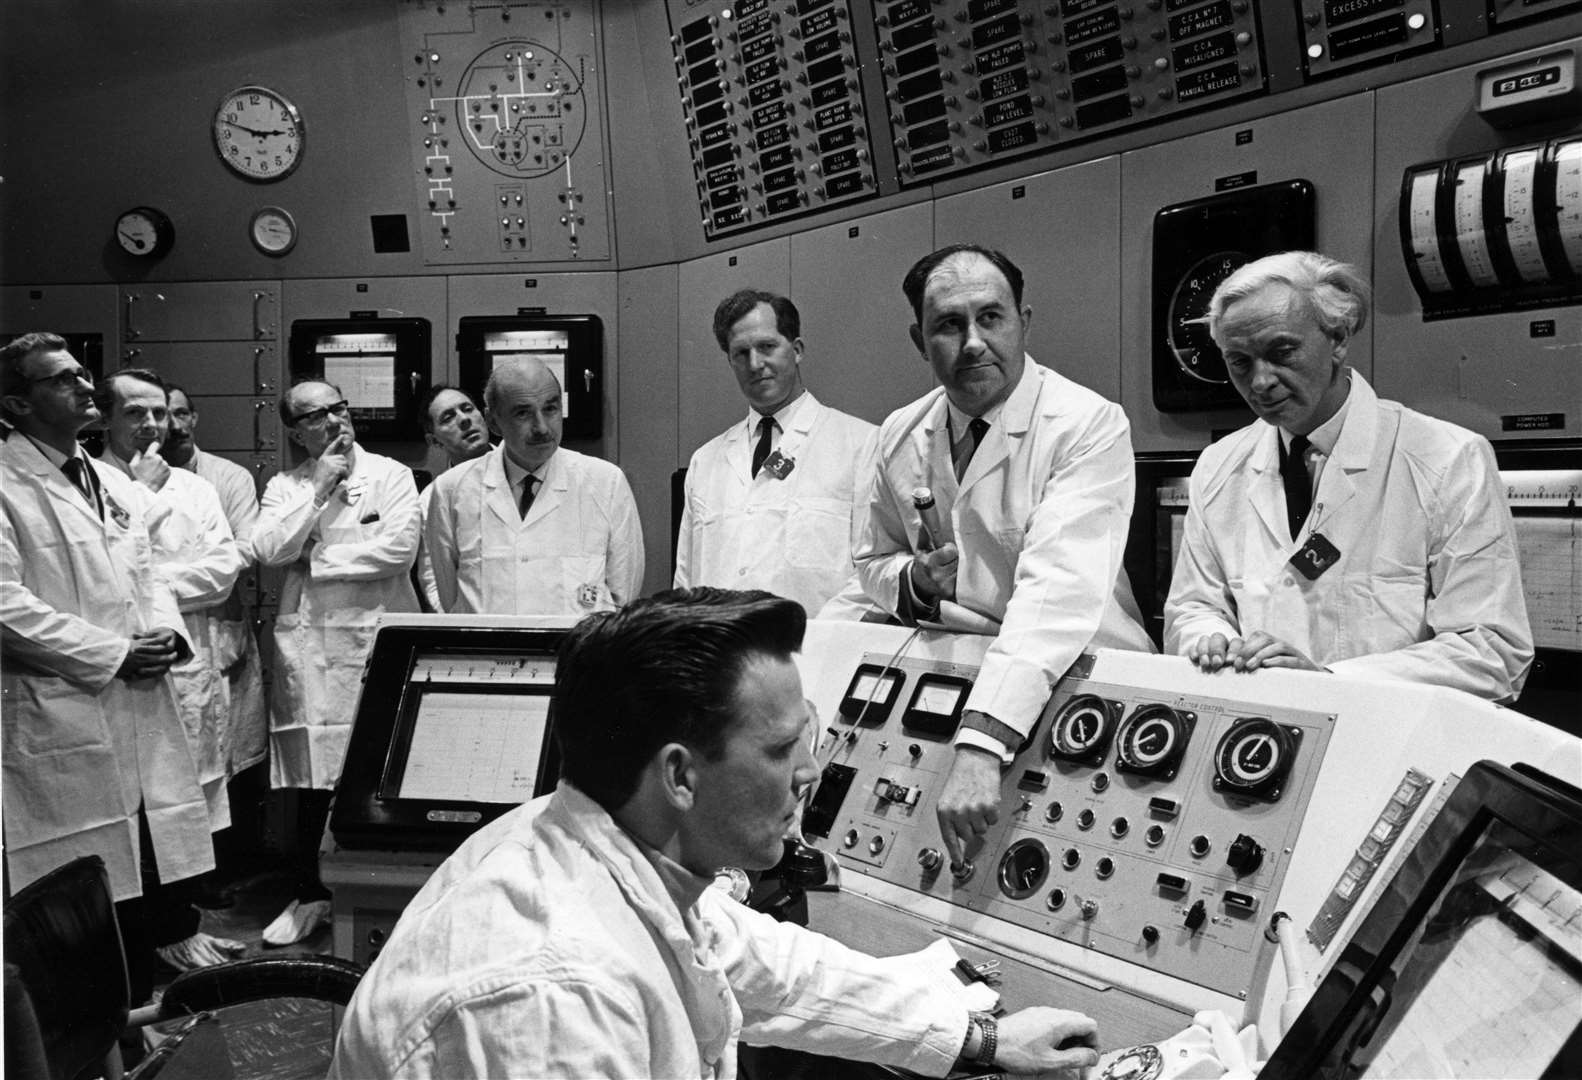 Control room image from the Dounreay archives. Picture: Dounreay (a division of Magnox) and NDA